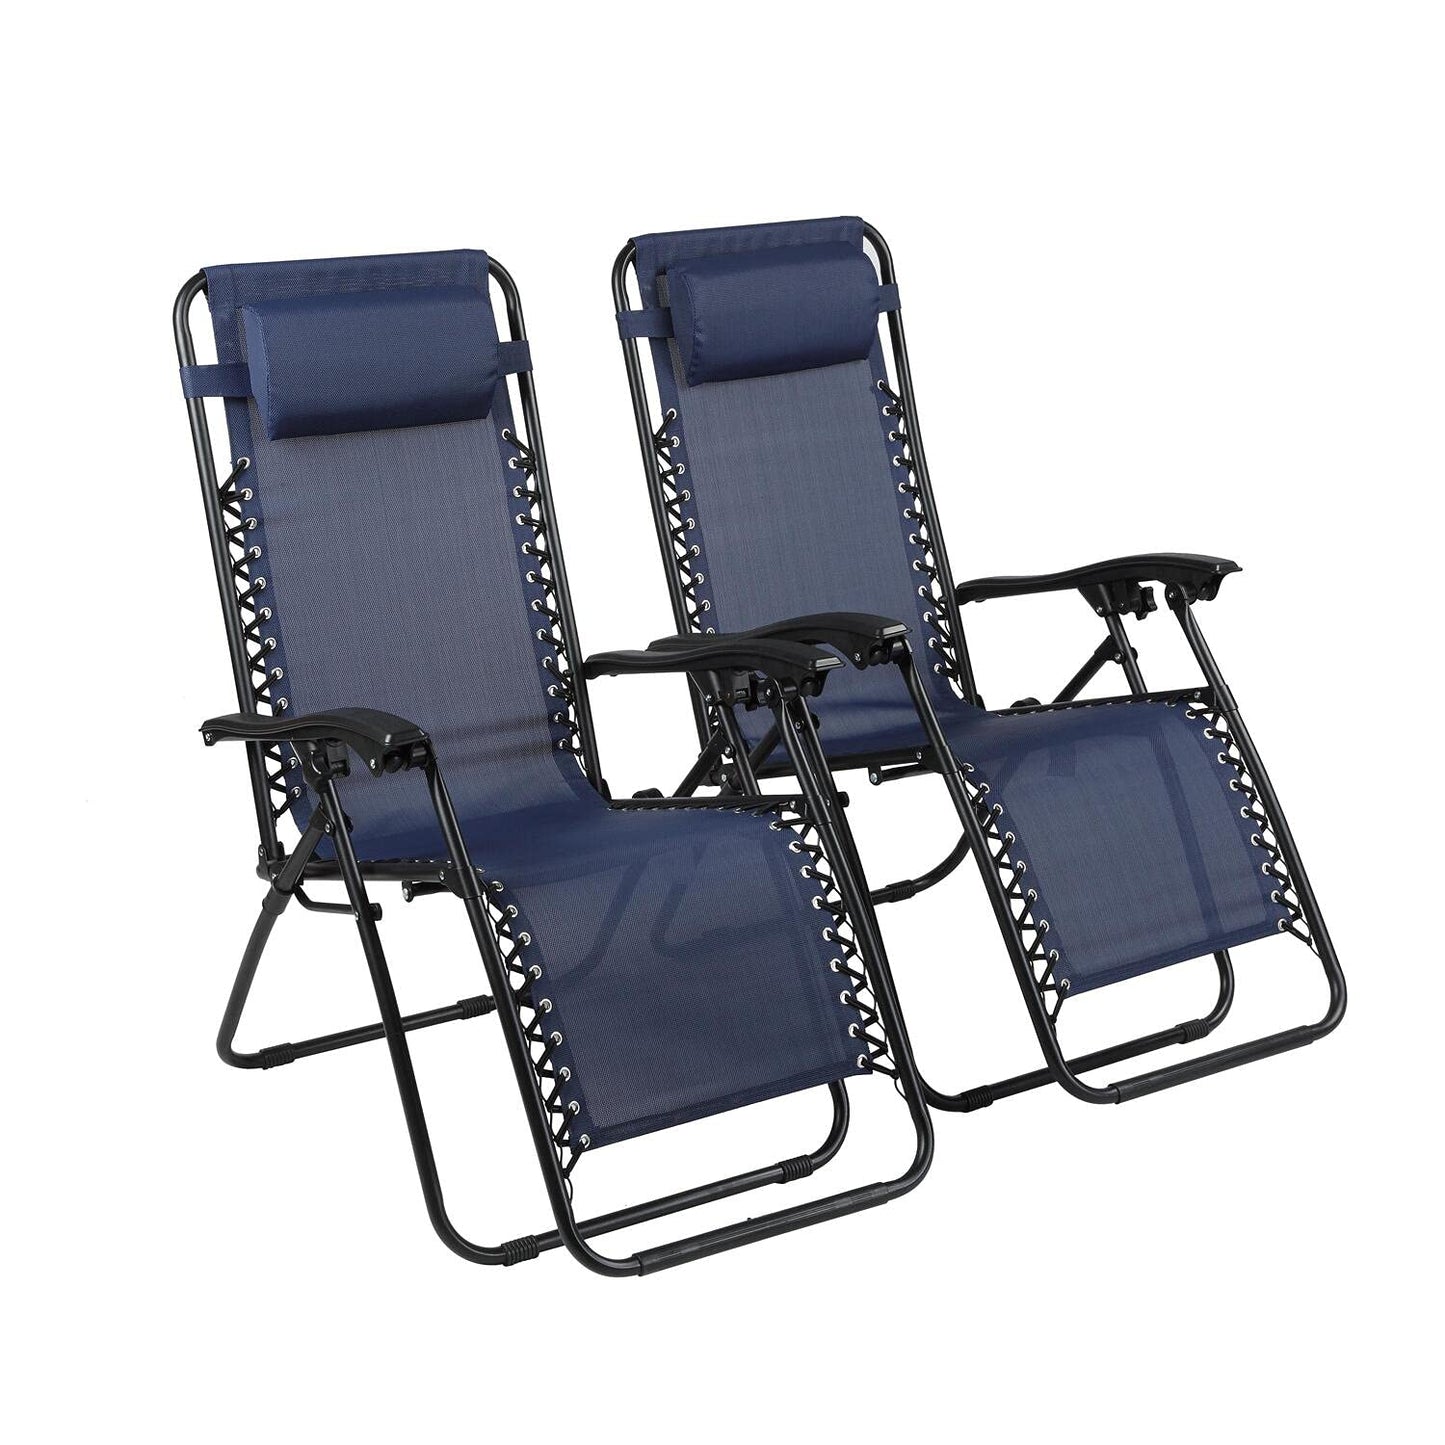 Zero Gravity Chairs Set of 2 Pool Lounge Chair Zero Gravity Recliner Zero Gravity Lounge Chair Antigravity Chairs Anti Gravity Chair Folding Reclining Camping Chair with Headrest by Naomi Home - Navy Modern